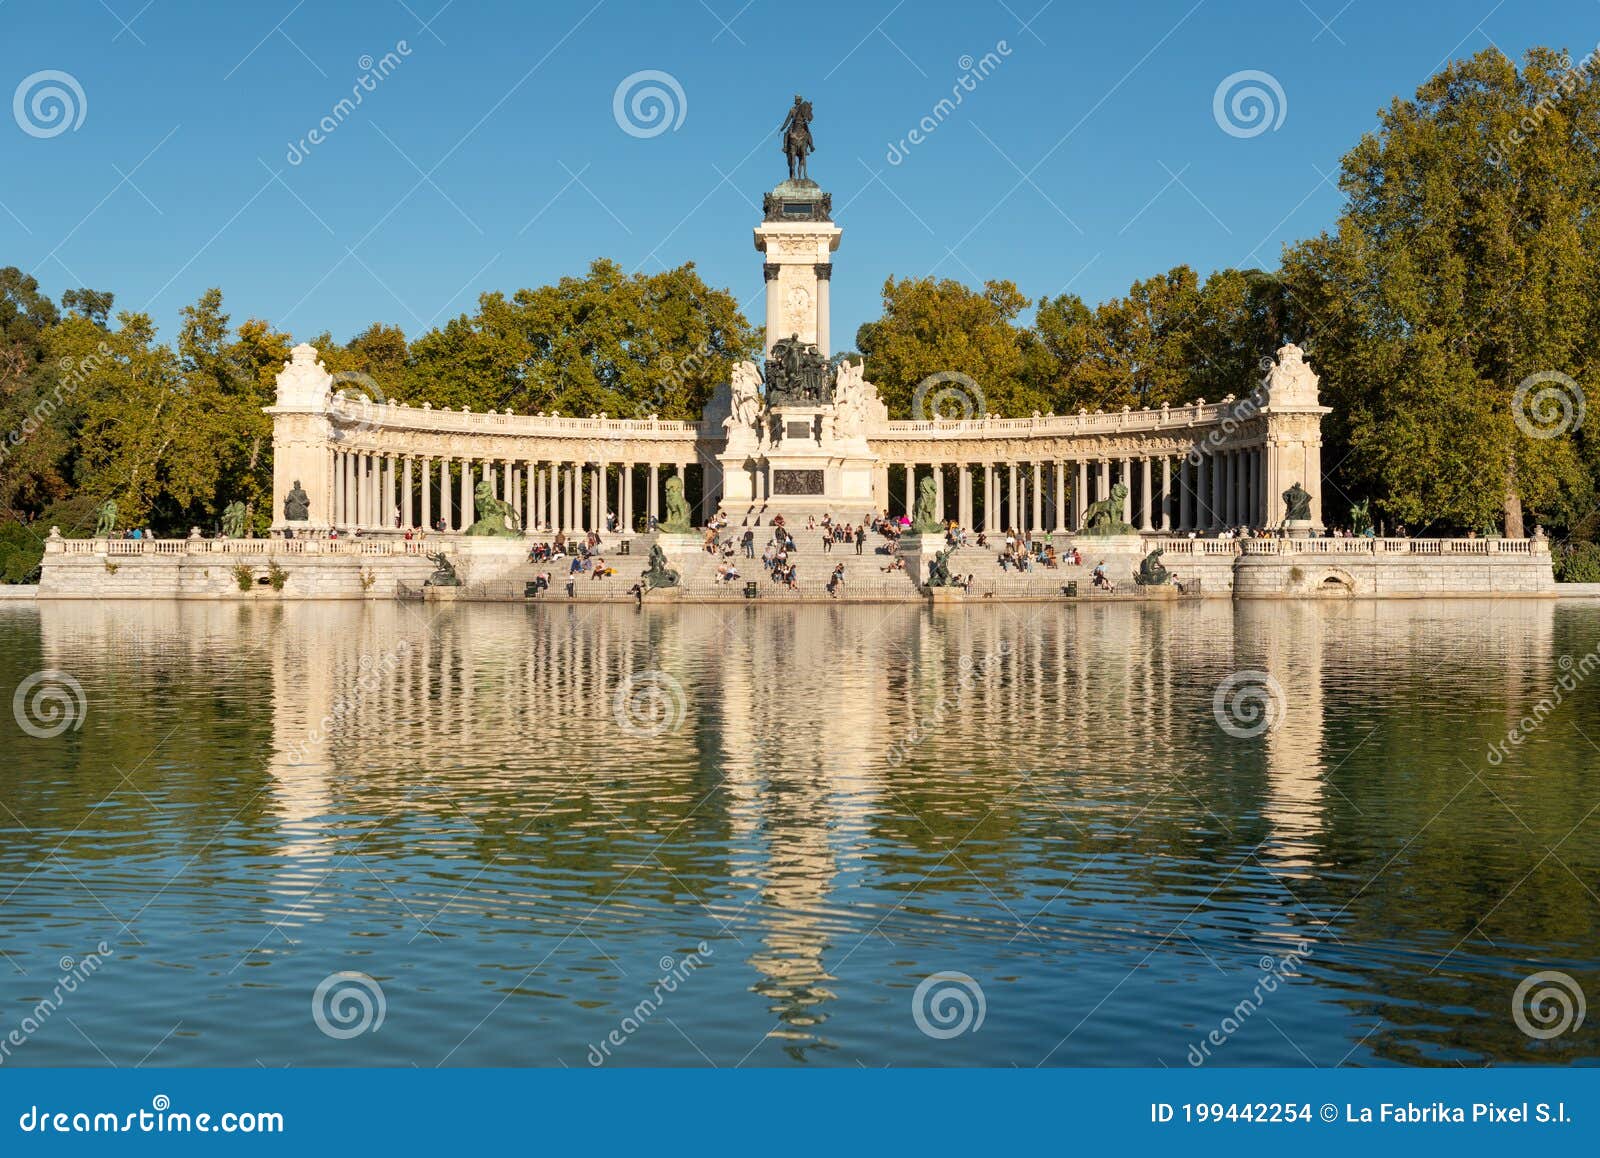 monument to alfonso xii by the pond